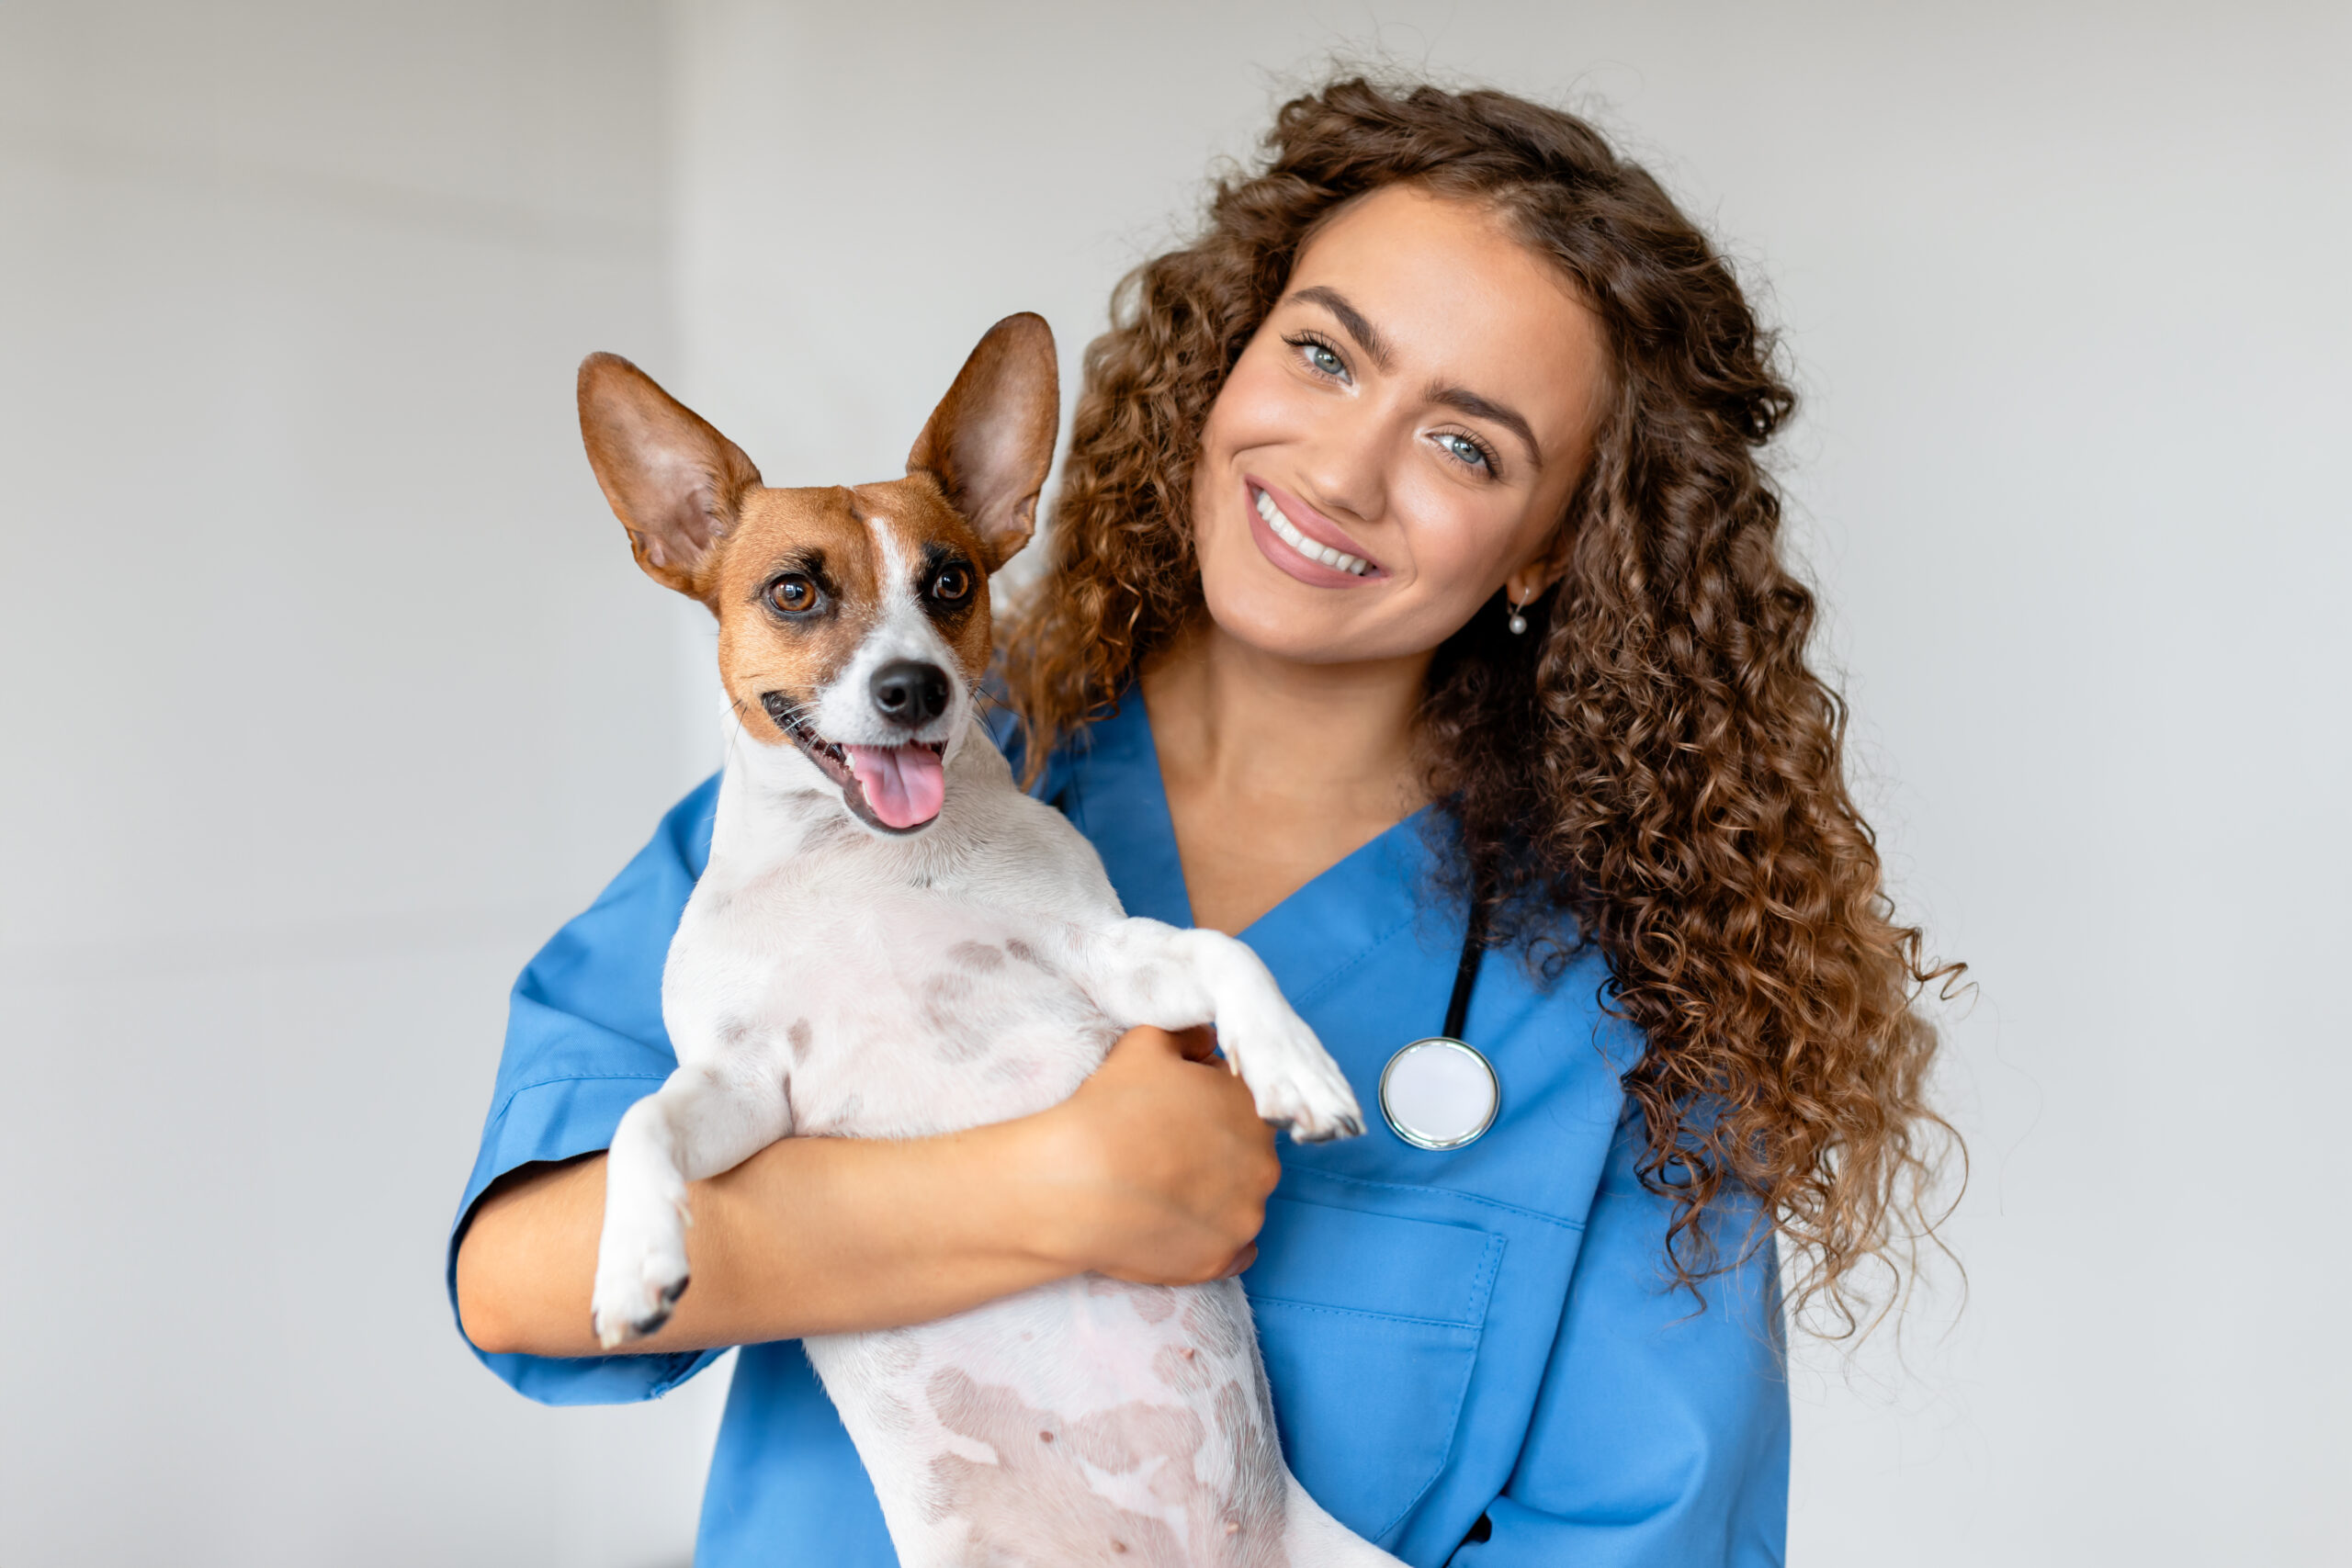 Smiling young woman veterinarian in blue coat holds a terrier, providing compassionate care in modern veterinary clinic setting, smiling at camera